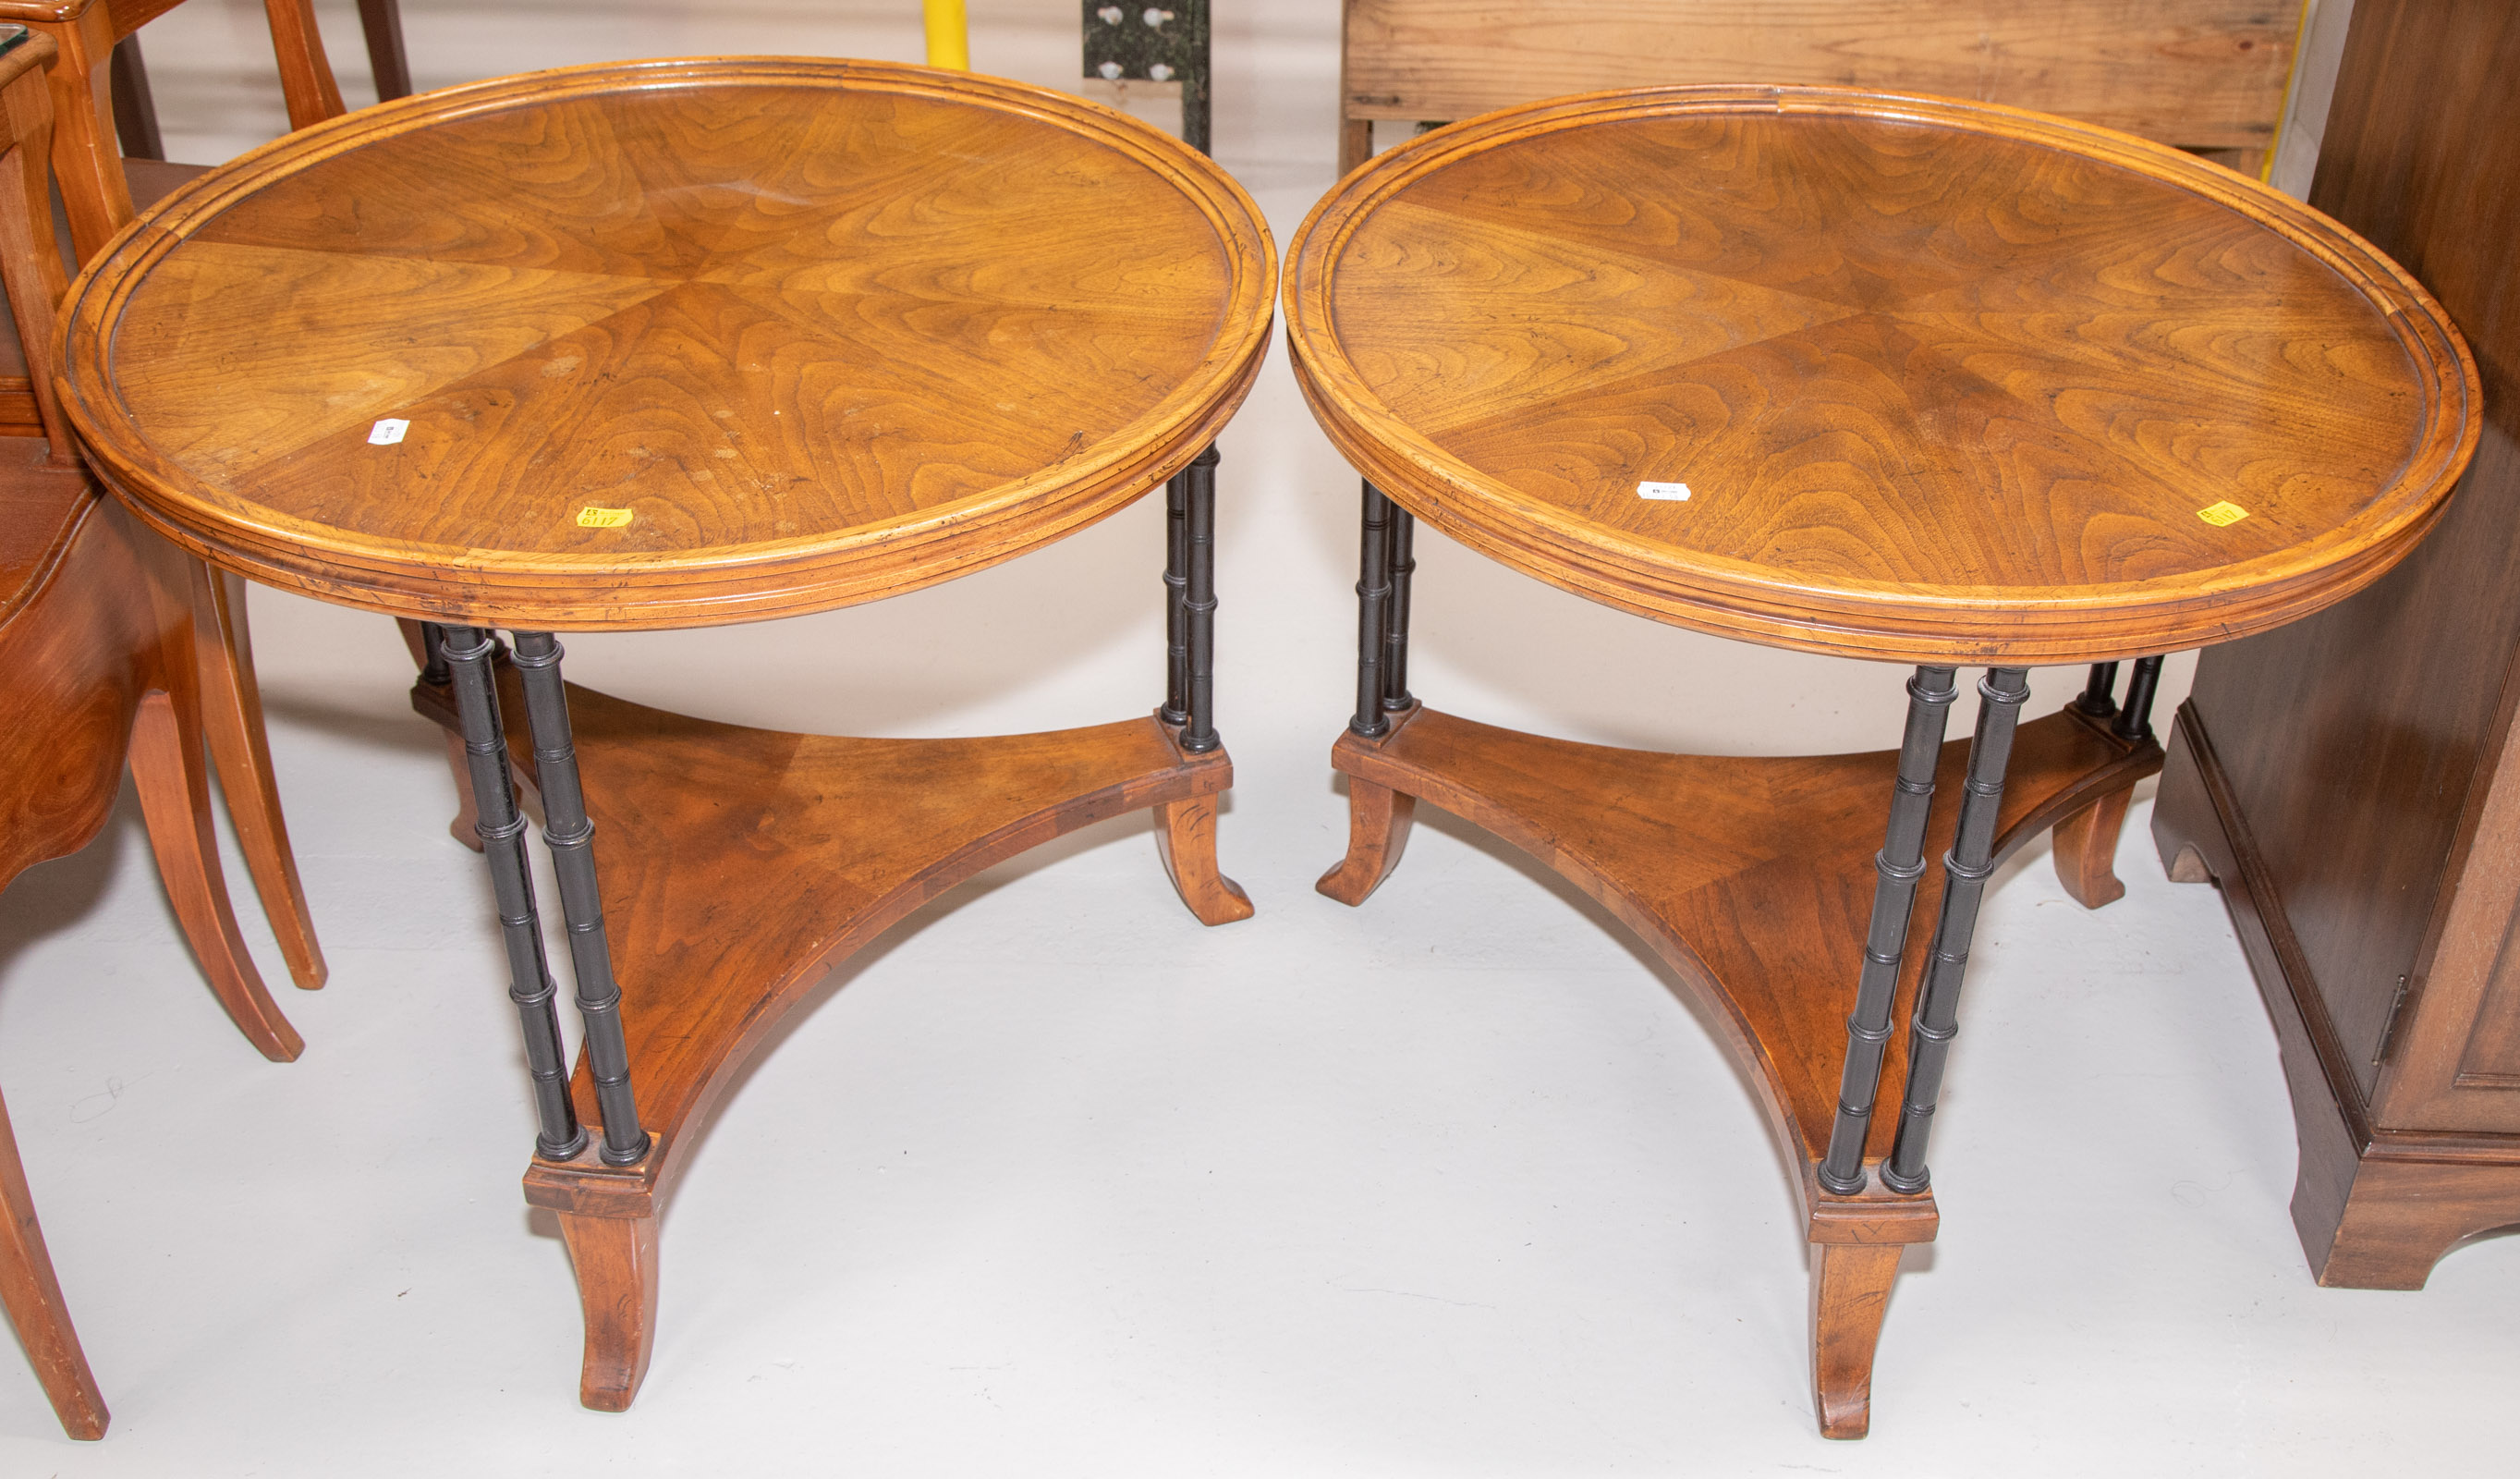 A PAIR OF NEOCLASSICAL STYLE ROUND